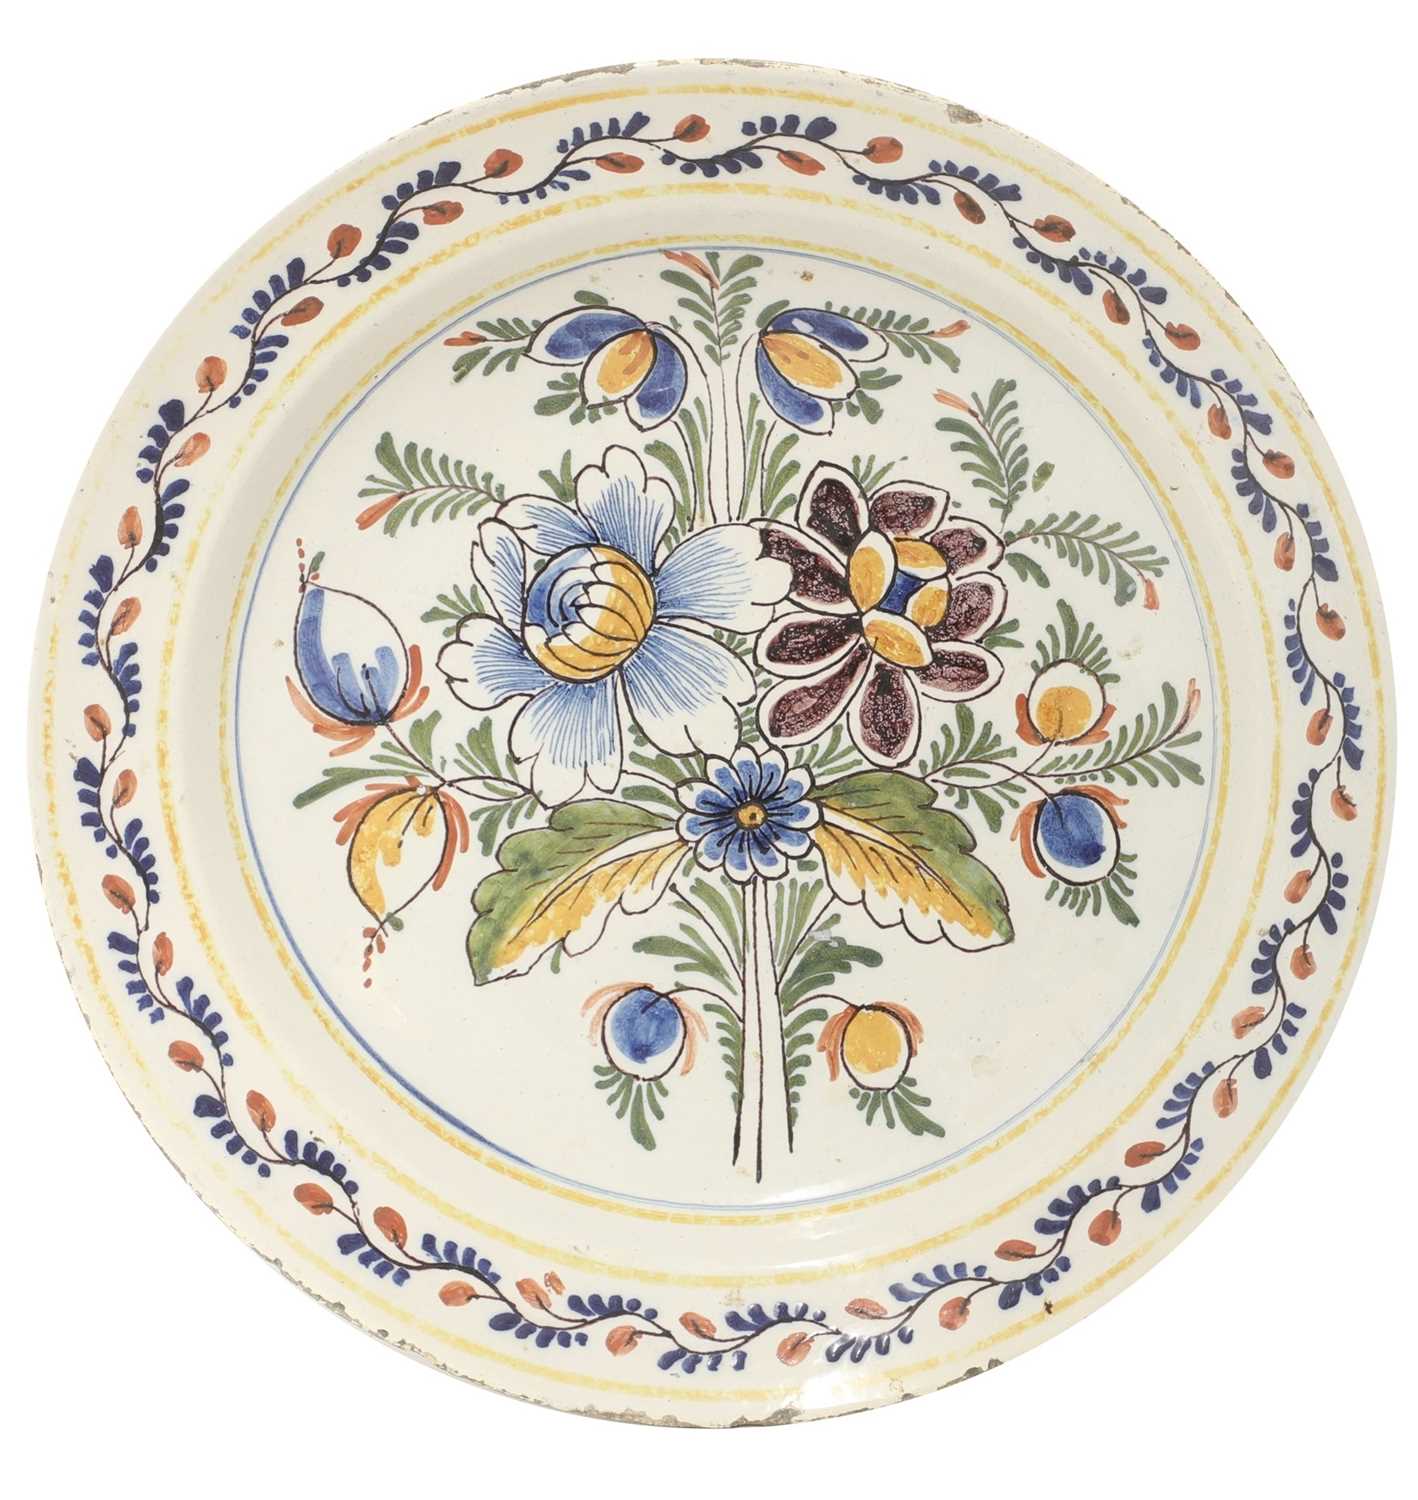 Lot 85 - A French faience charger